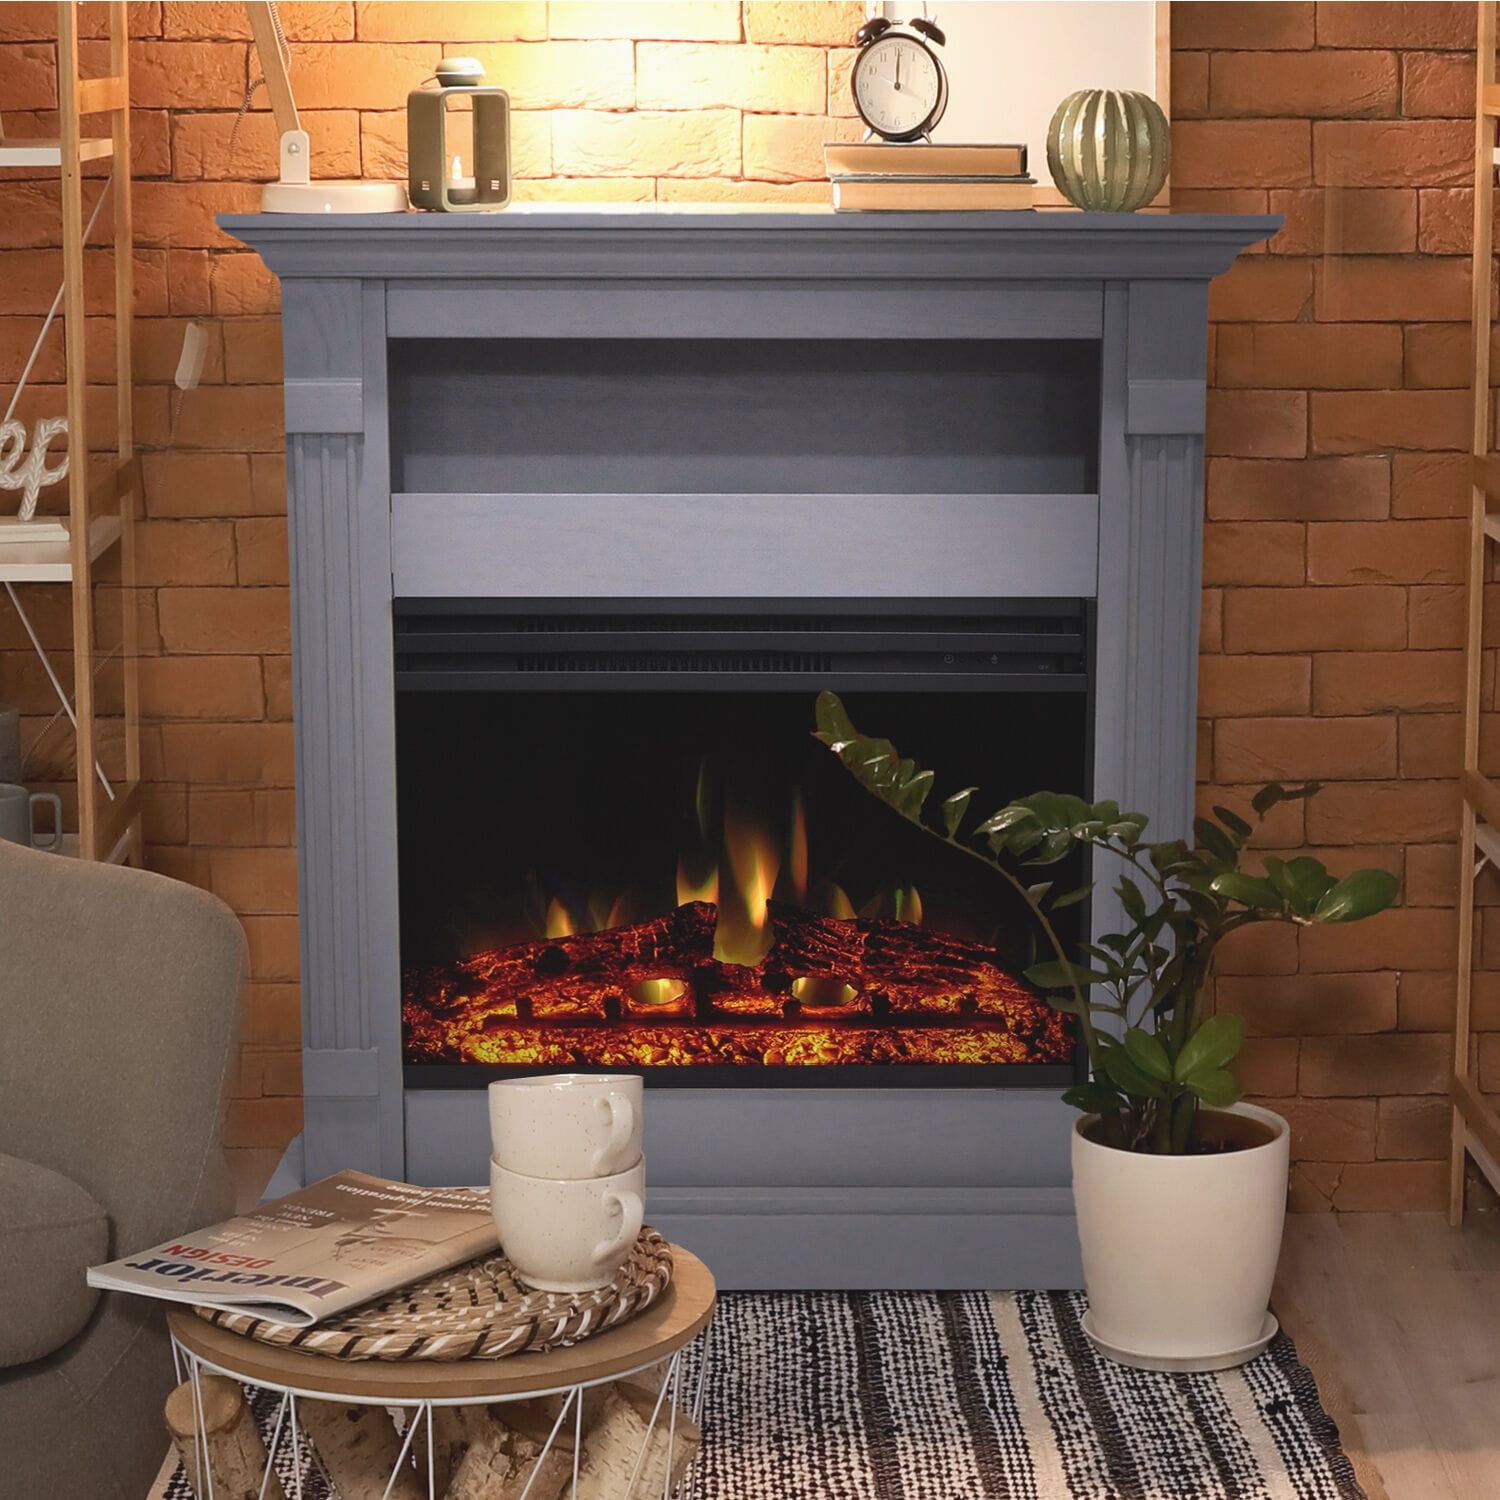 Cambridge Sienna 34-In. Electric Fireplace Heater w/Slate Blue Mantel, Enhanced Log Display, Multi-Color Flames & Remote Control